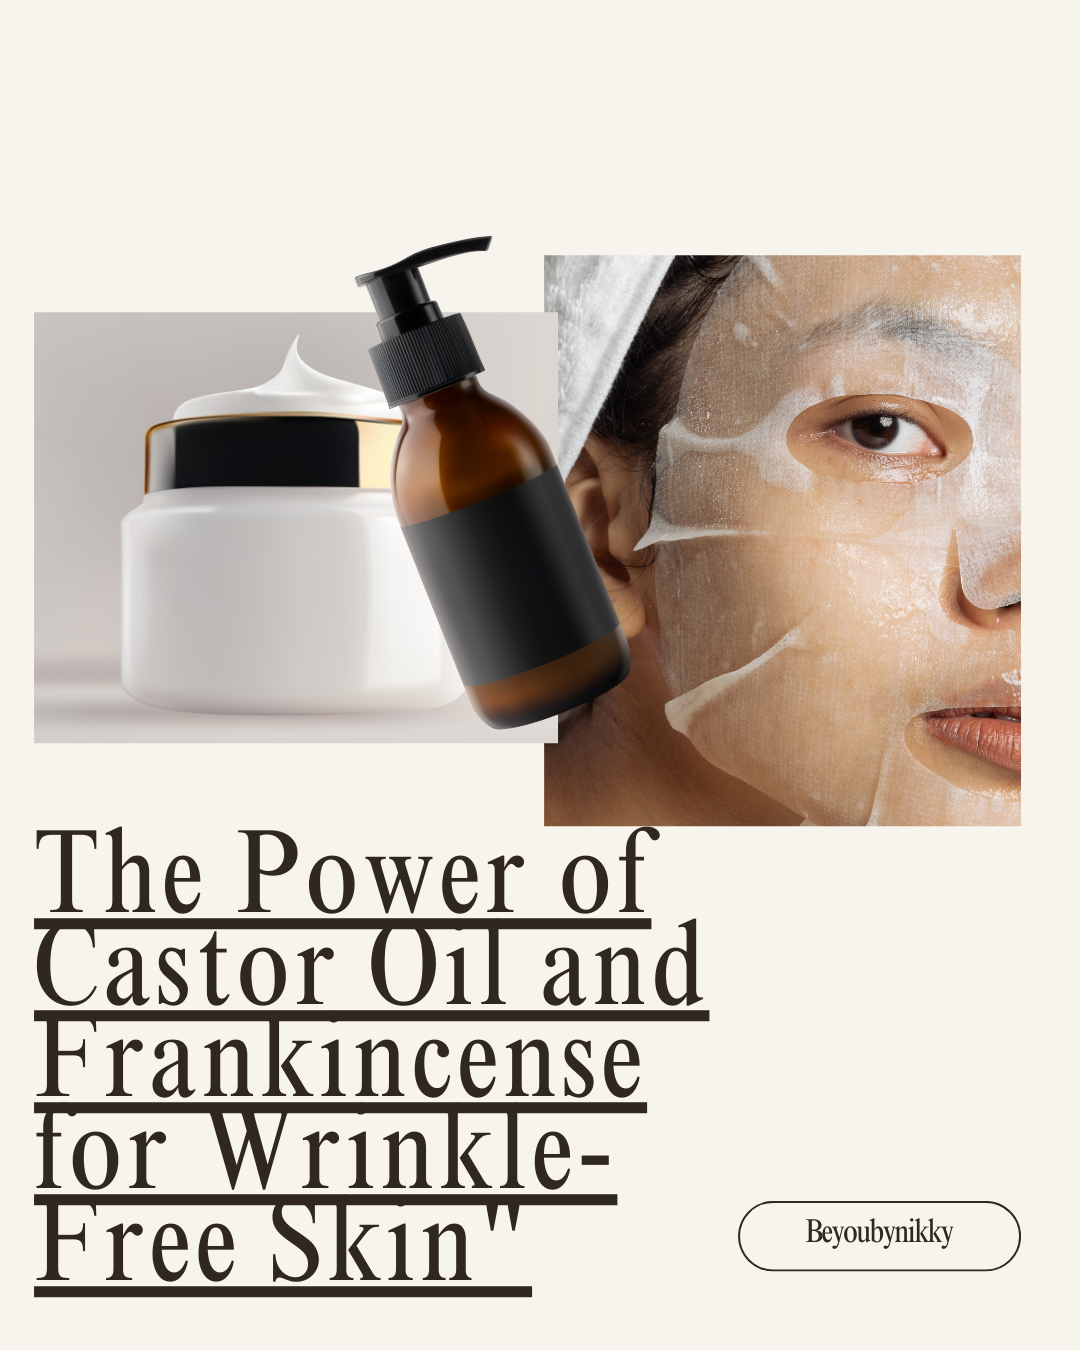 The Power of Castor Oil and Frankincense for Wrinkle-Free Skin